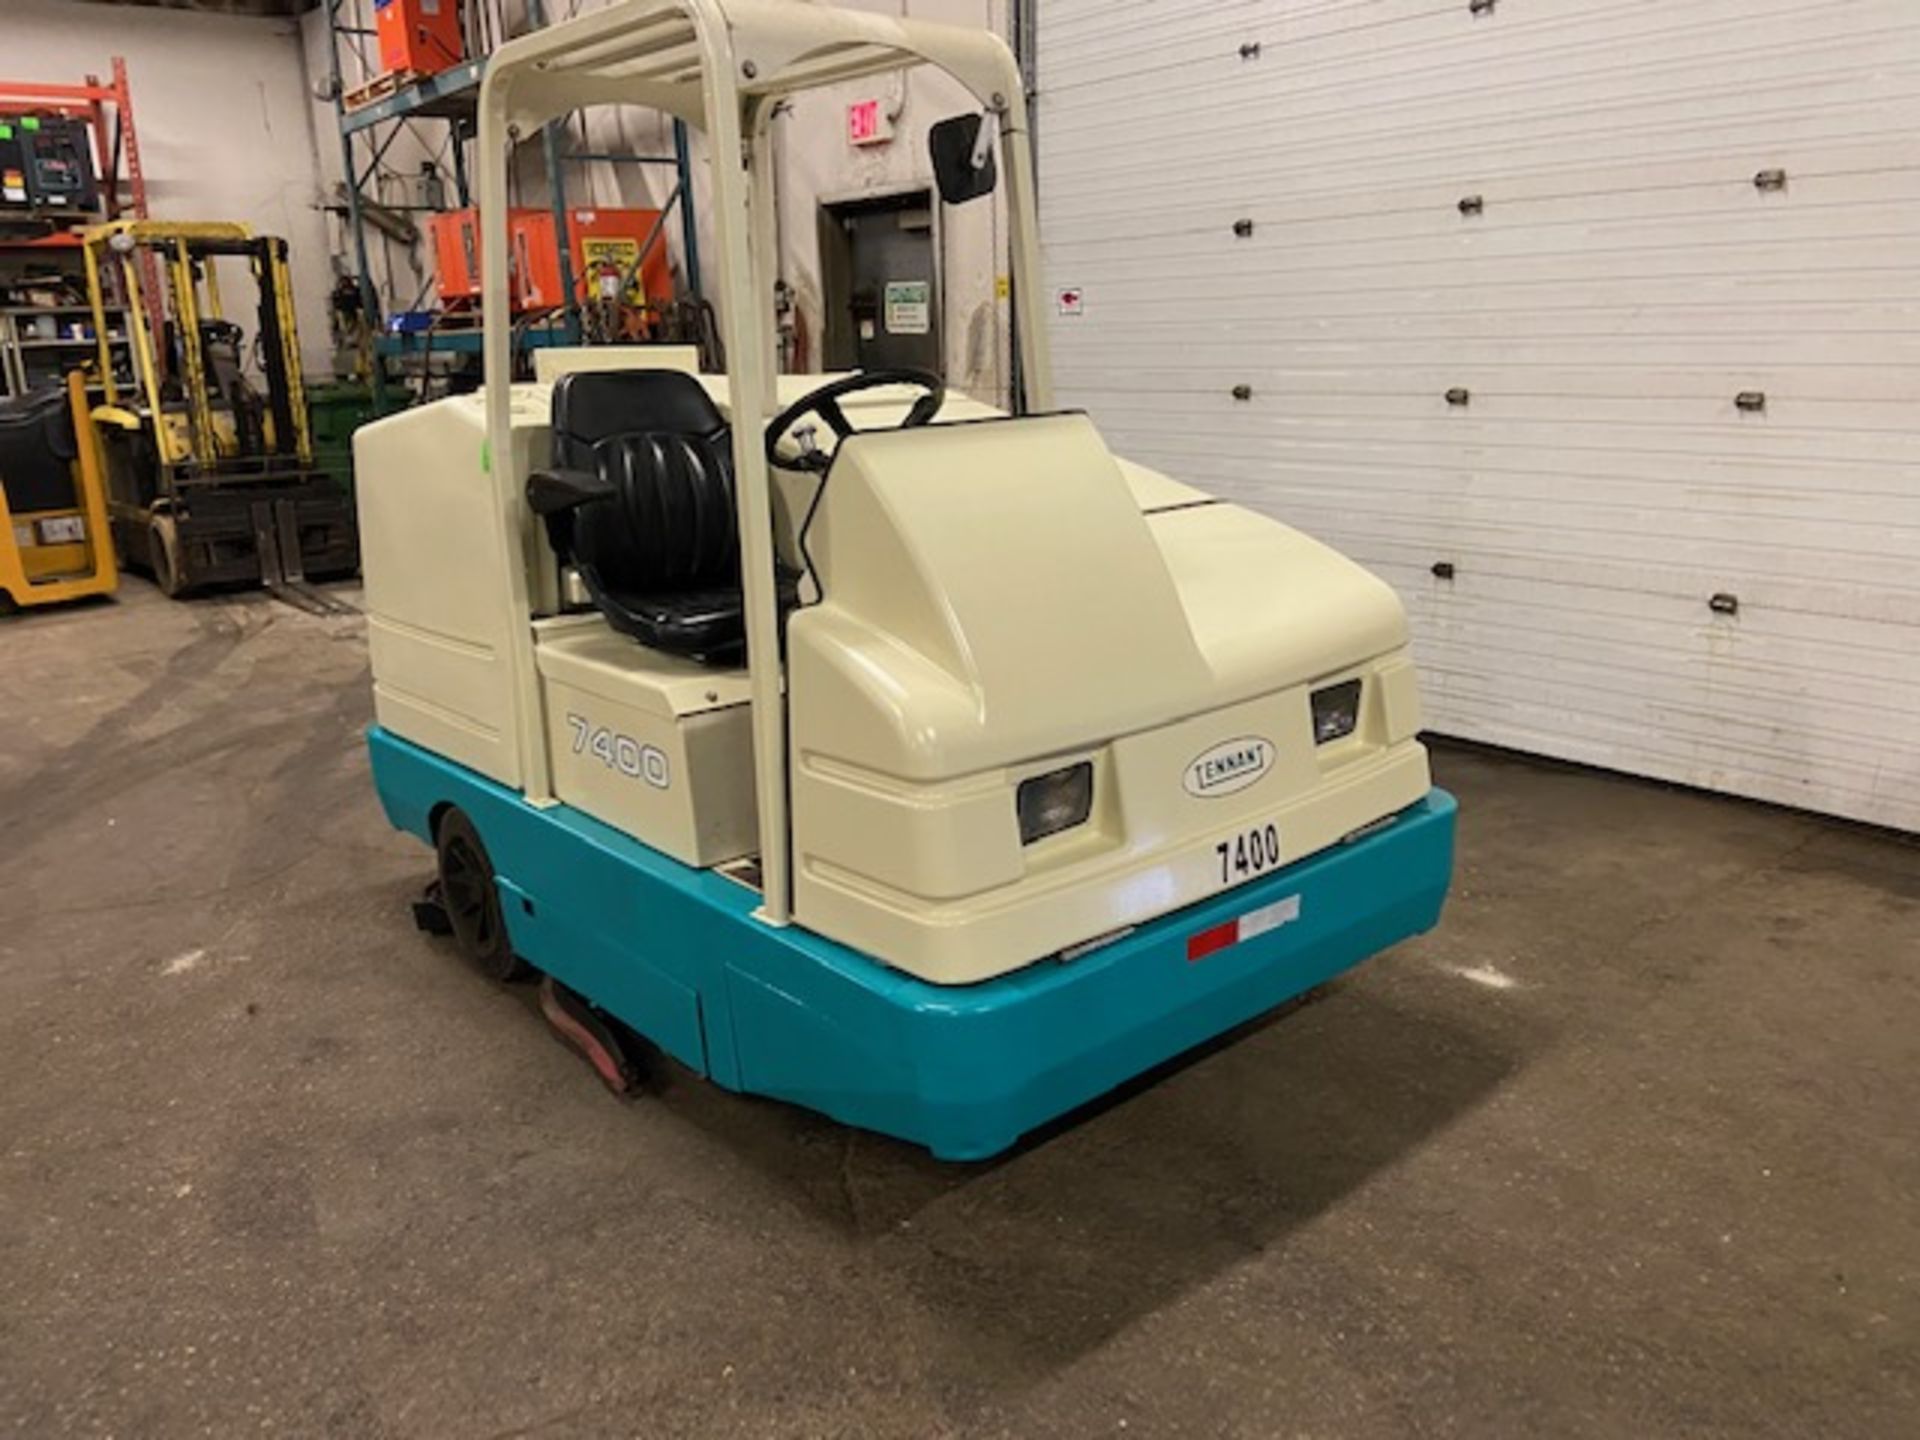 Tennant Ride On Scrubber Unit Model 7400 LPG (propane) (no propane tank included) - Image 3 of 3